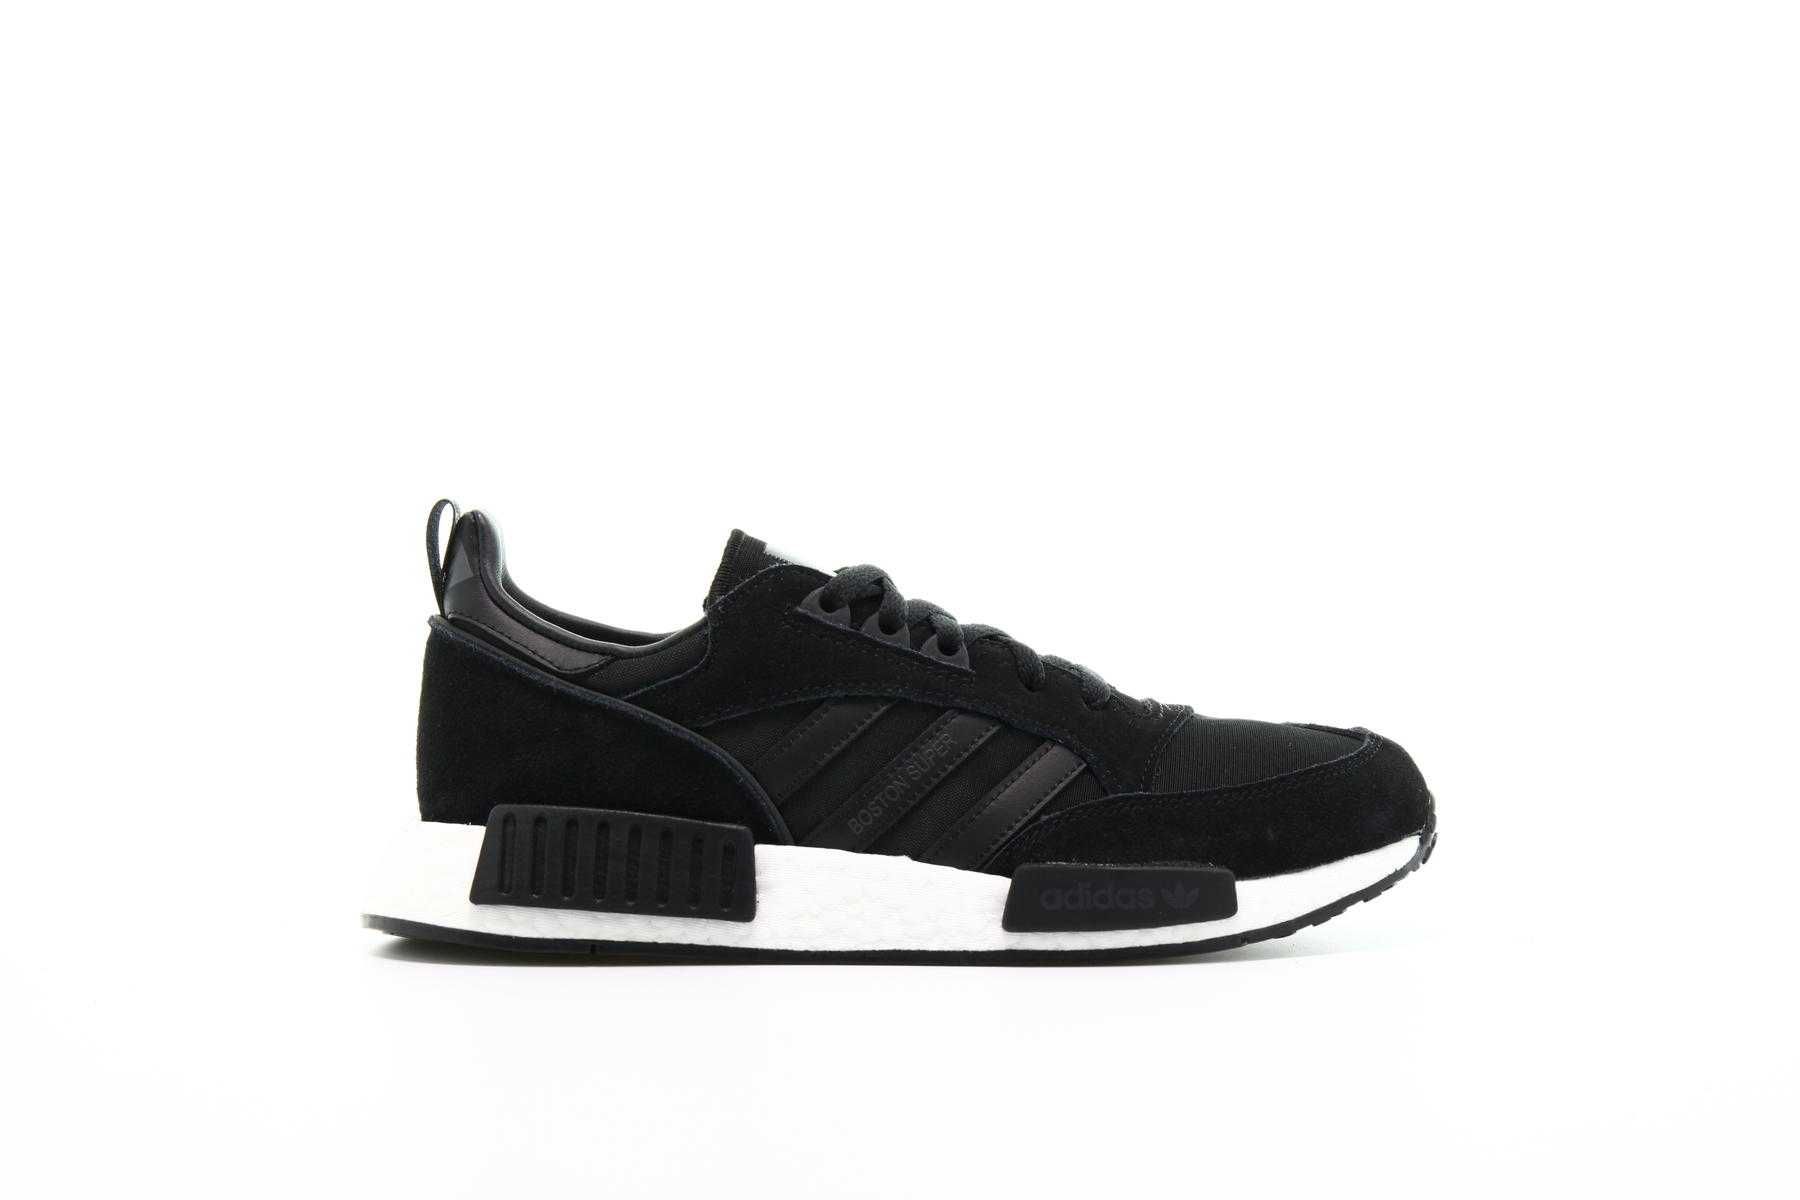 Limited! Buty Adidas Originals Boston Never Made Pack Black  boost nmd